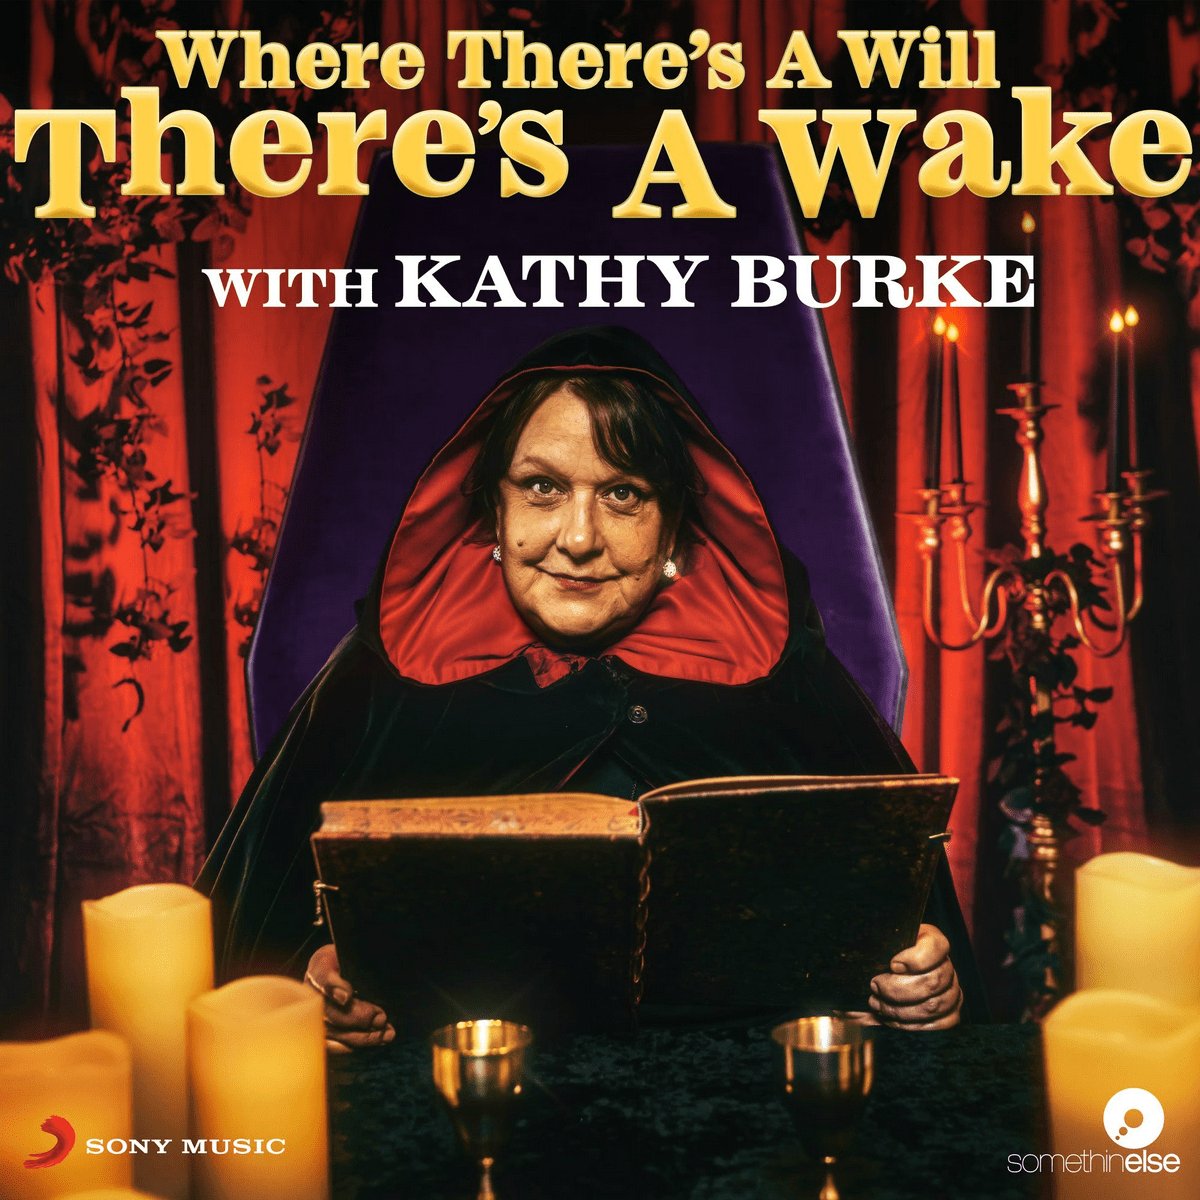 Comedy Podcast of the Day

@deathpodcast_
Guest @RealBobMortimer

[Where There's A Will, There's A Wake] Here Lies Bob Mortimer   #whereTheresAWillTheresAWake 
@KathyBurke
#bobmortimer
podcastaddict.com/episode/158103…